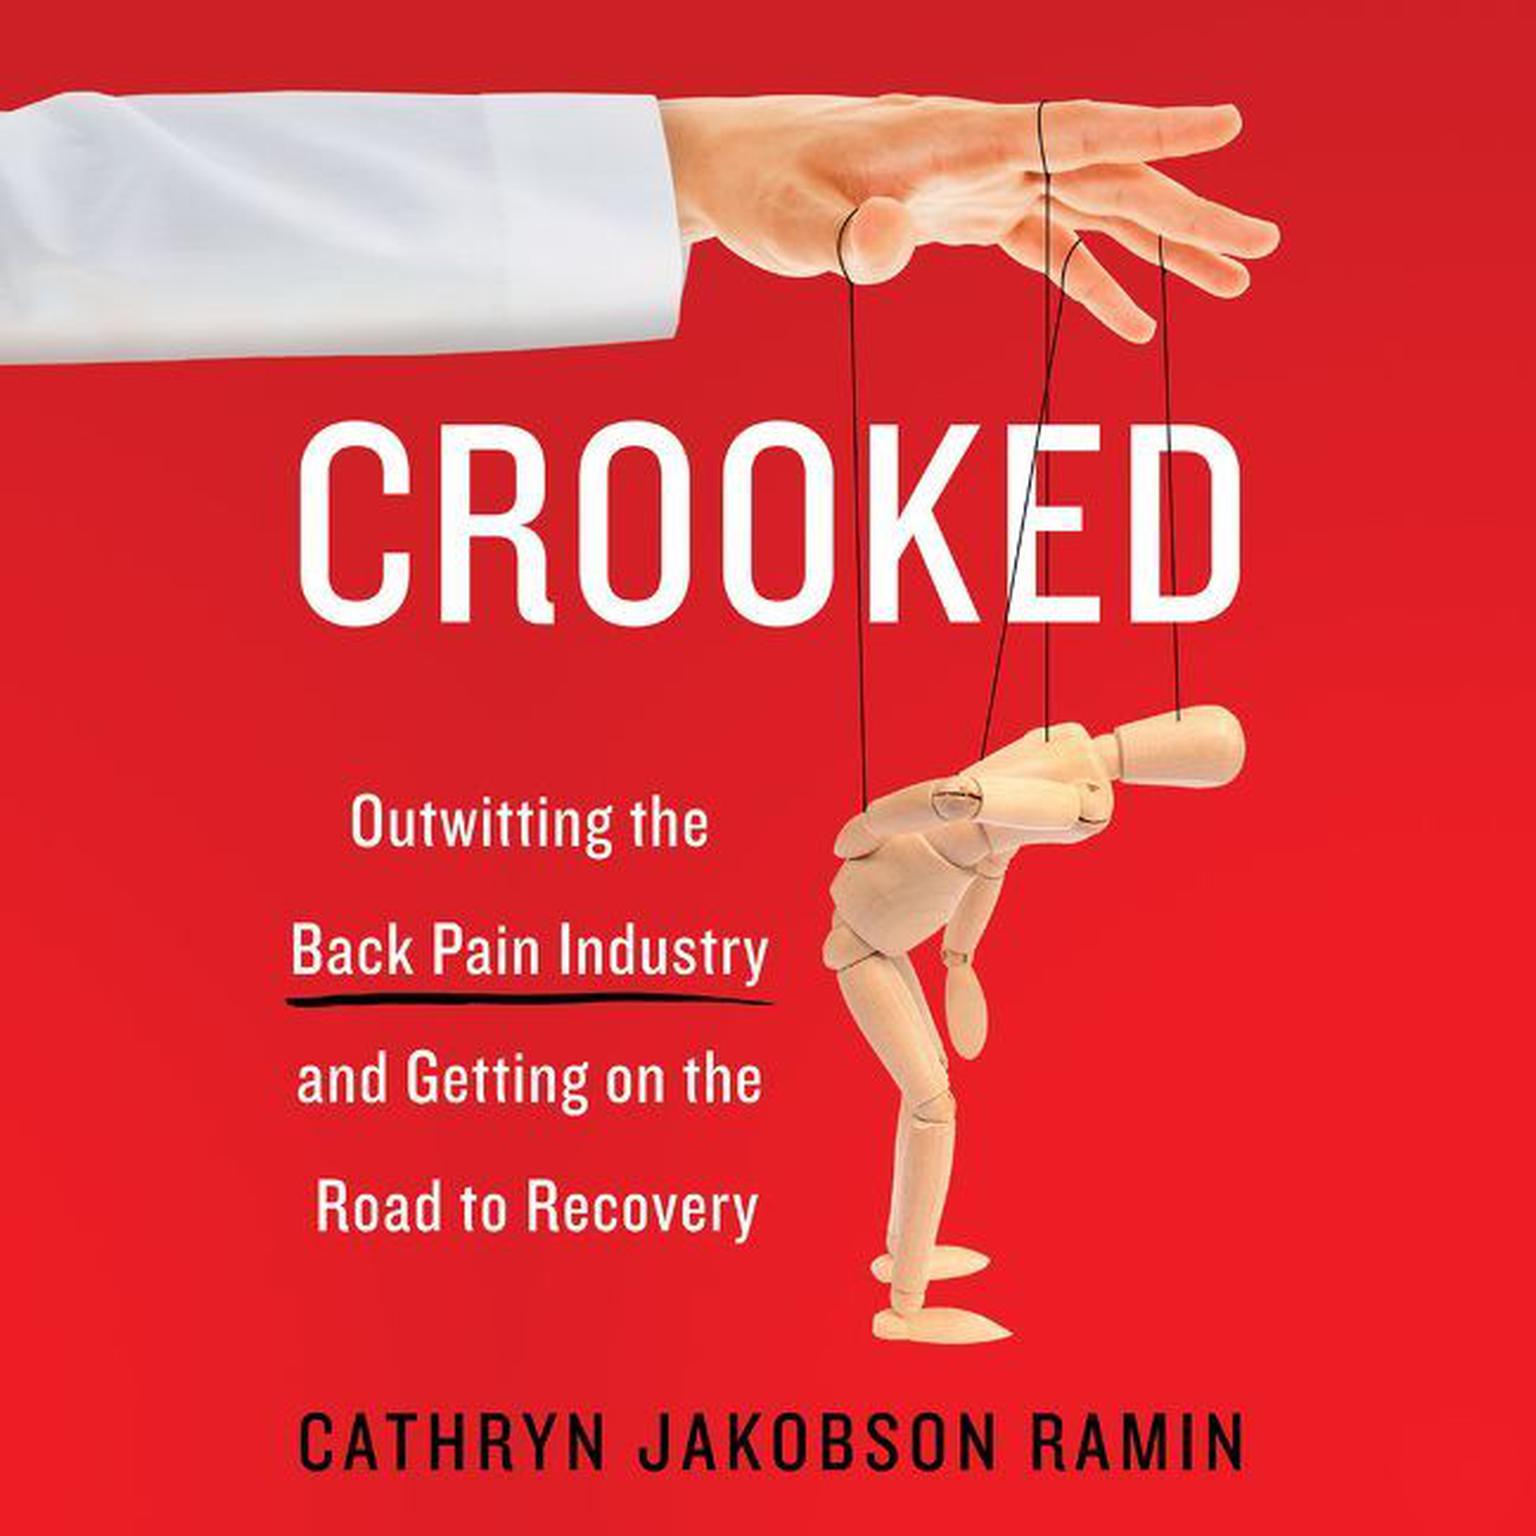 Crooked: Outwitting the Back Pain Industry and Getting on the Road to Recovery Audiobook, by Cathryn Jakobson Ramin